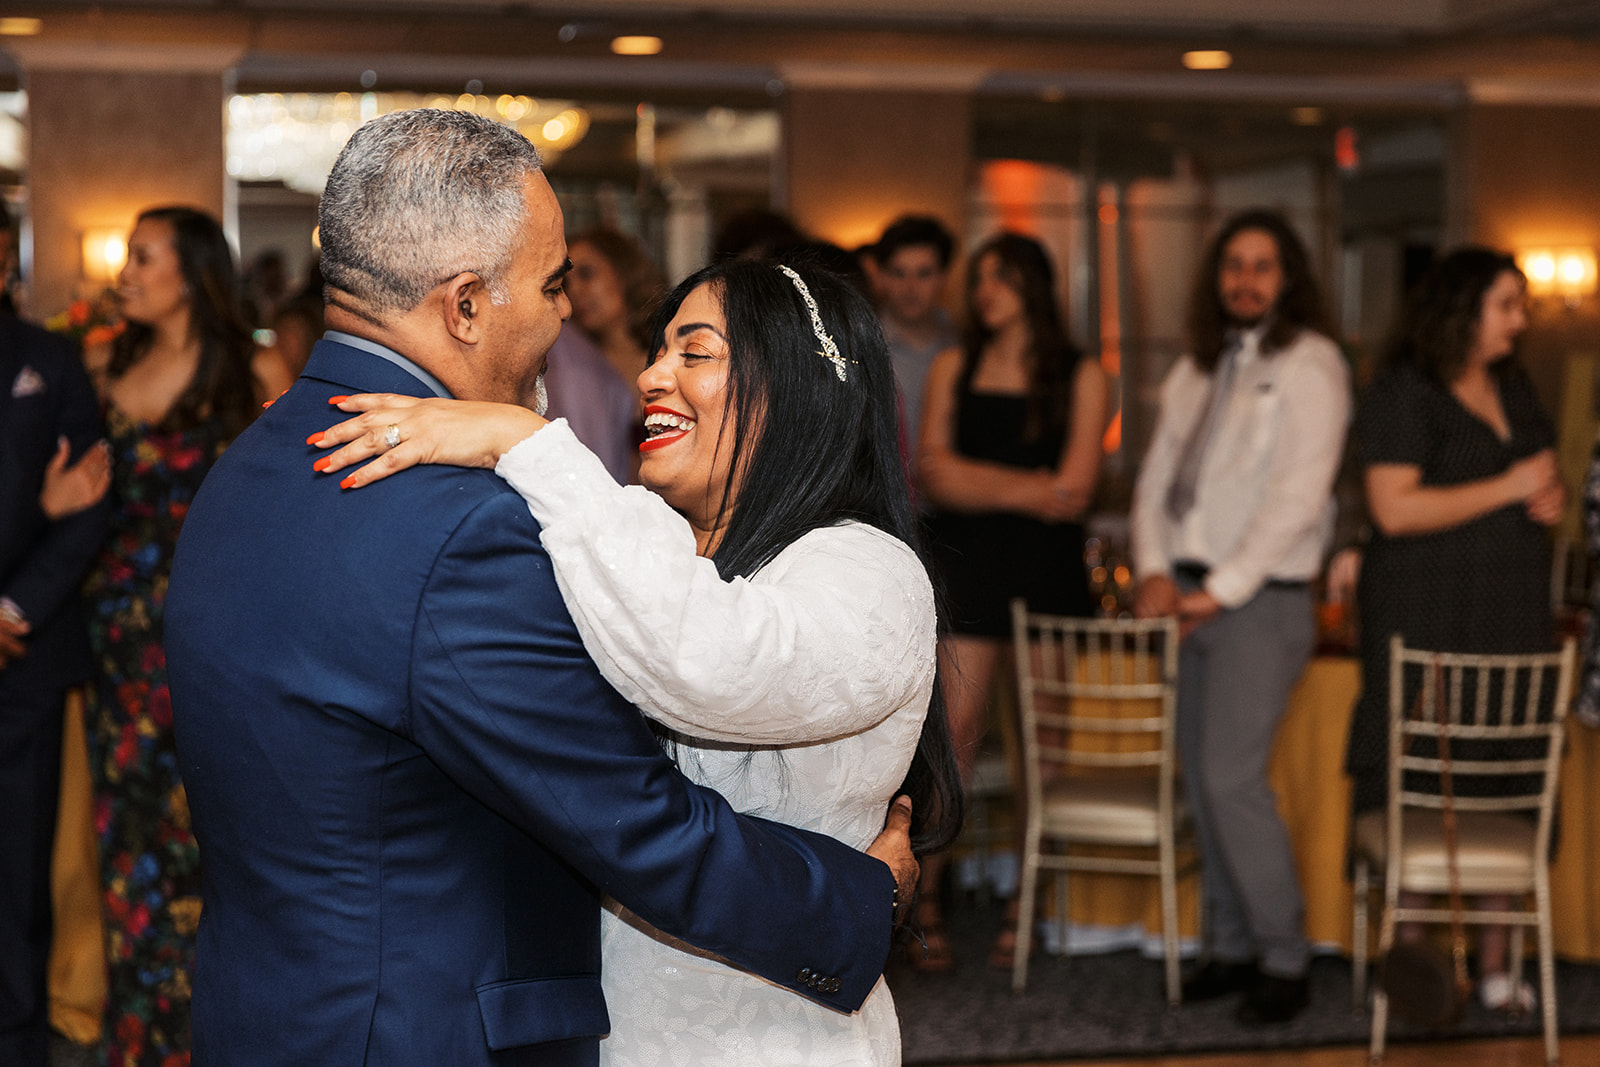 Newlyweds dance for the first time surrounded by guests at The Shore Club Boutique Hotel